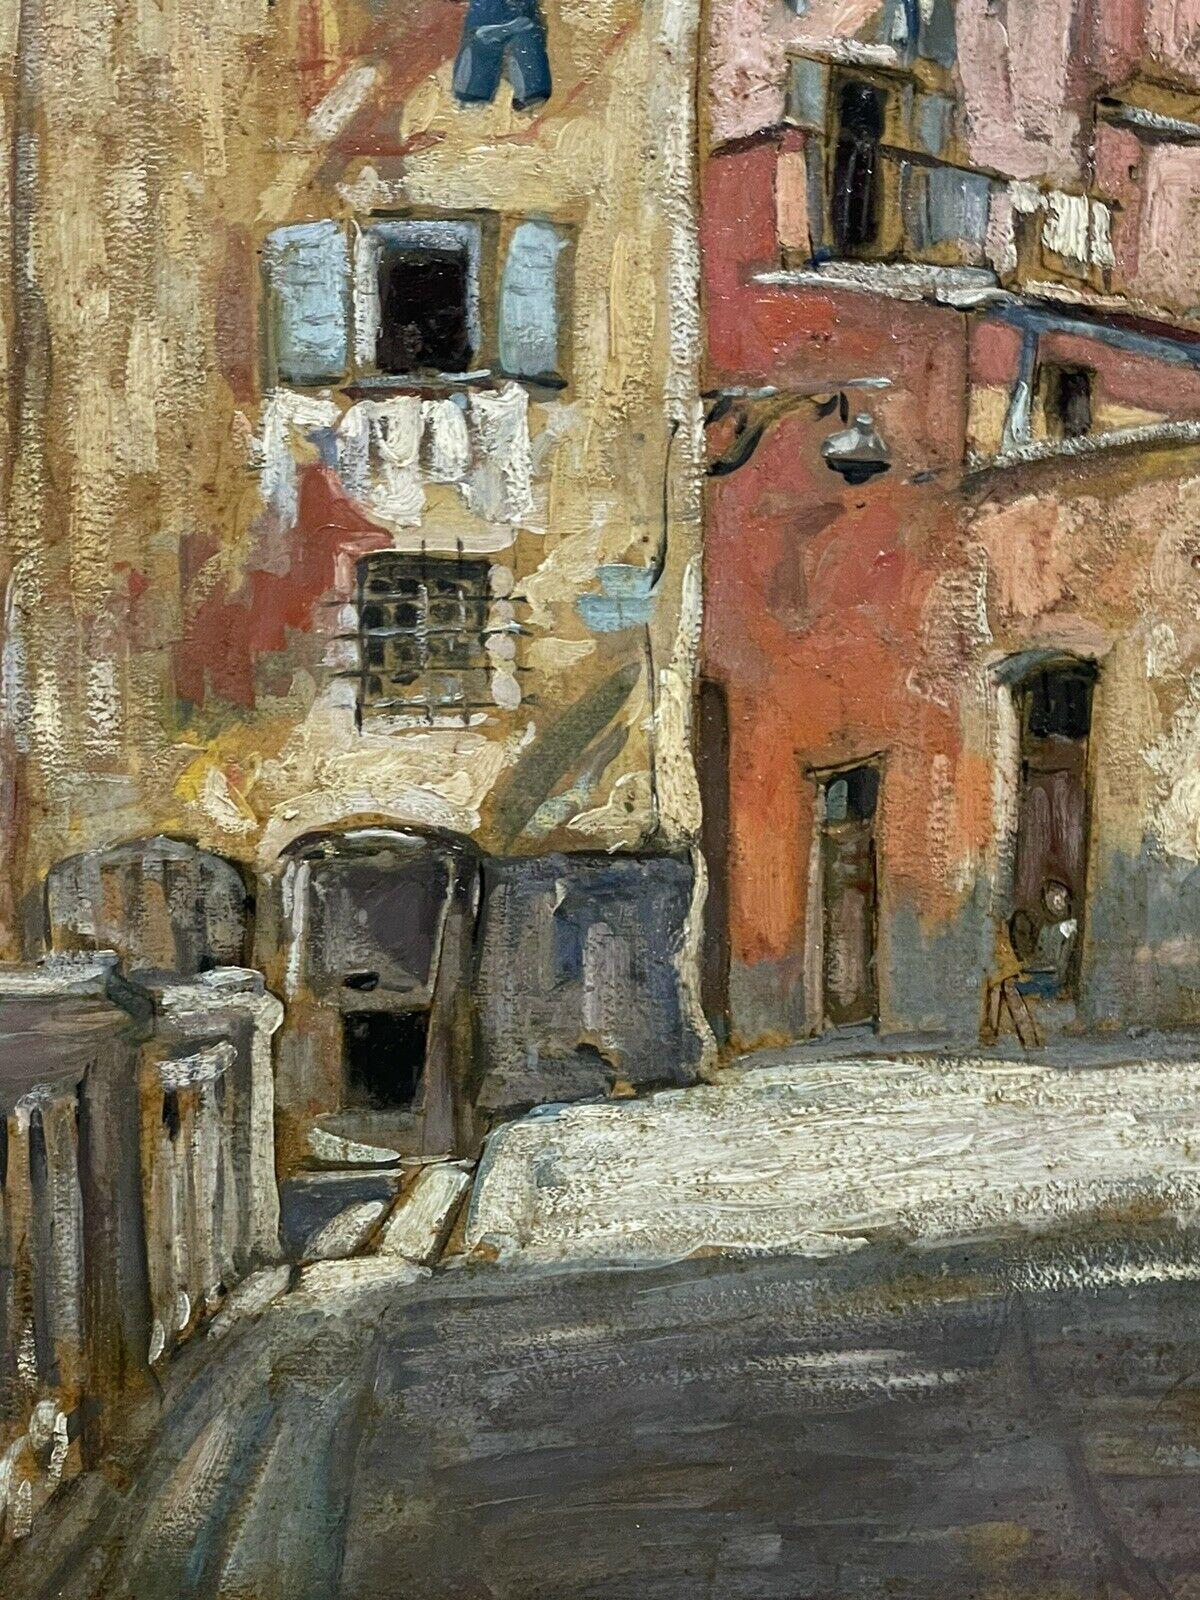 The Old Town Nice, South of France, Signed French Modernist Oil 1930's - Brown Figurative Painting by 1930's French